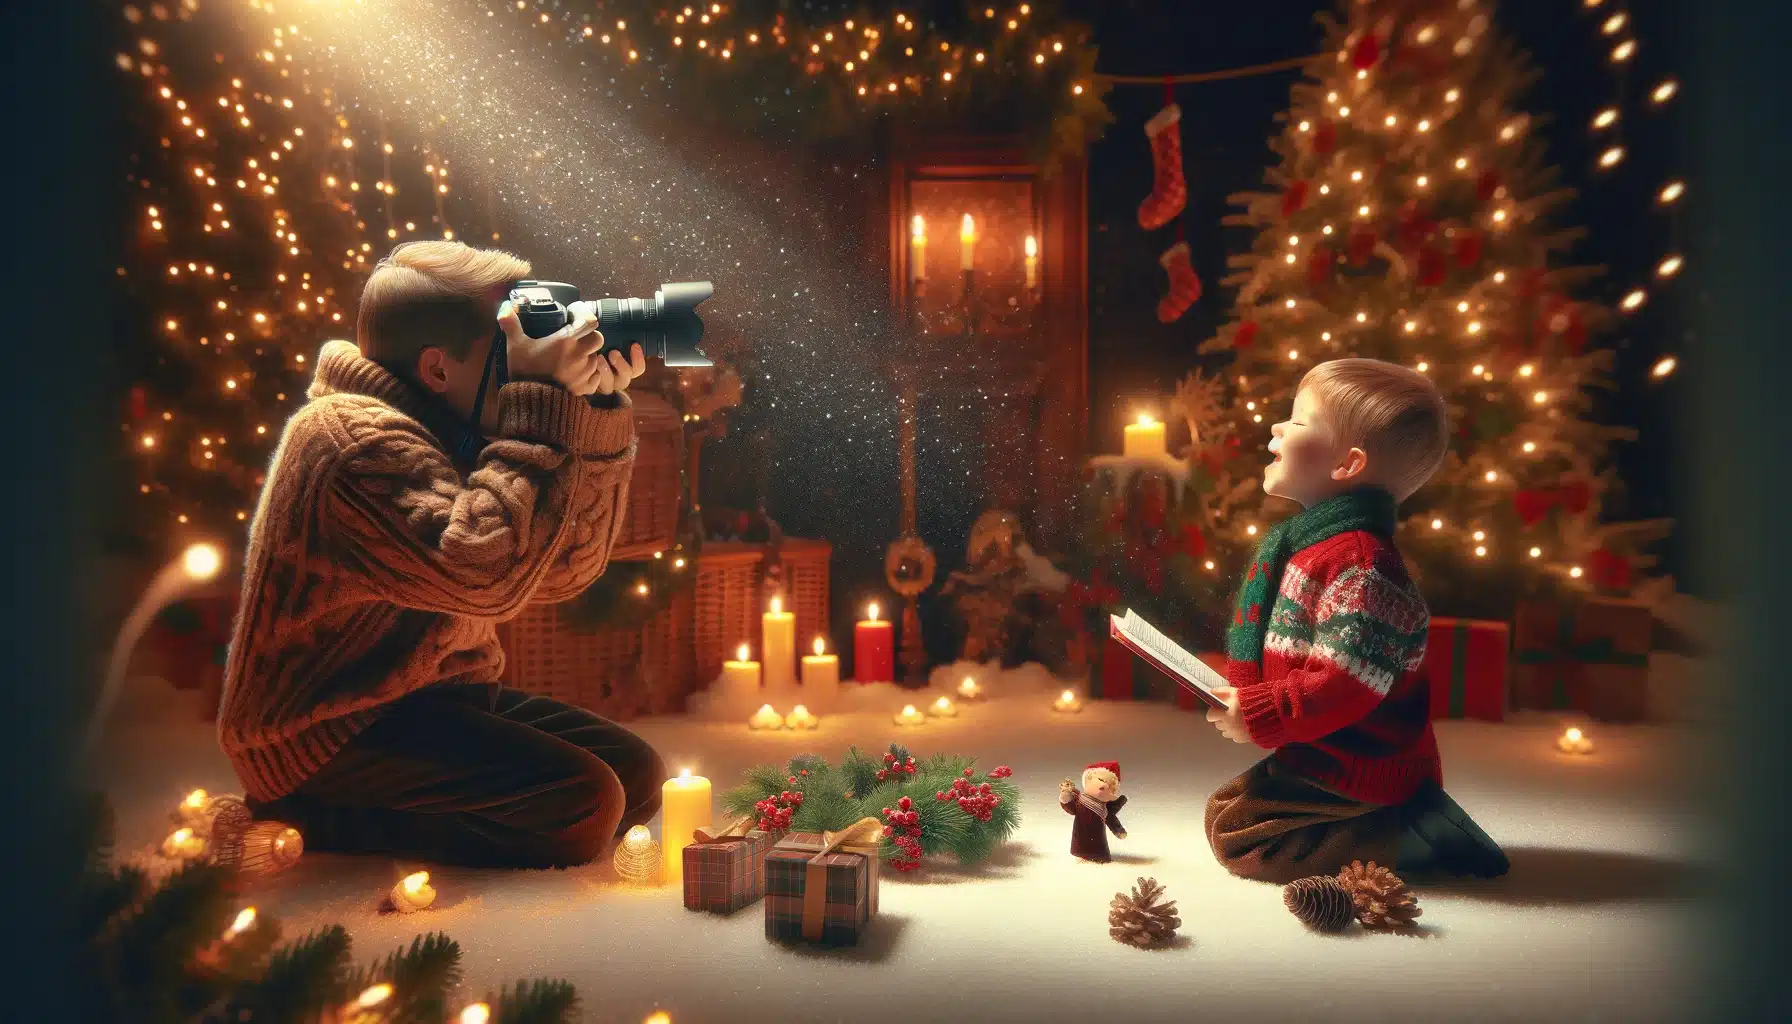 Infancy caroling on the ground captured by a Shooter, surrounded by festive decorations.